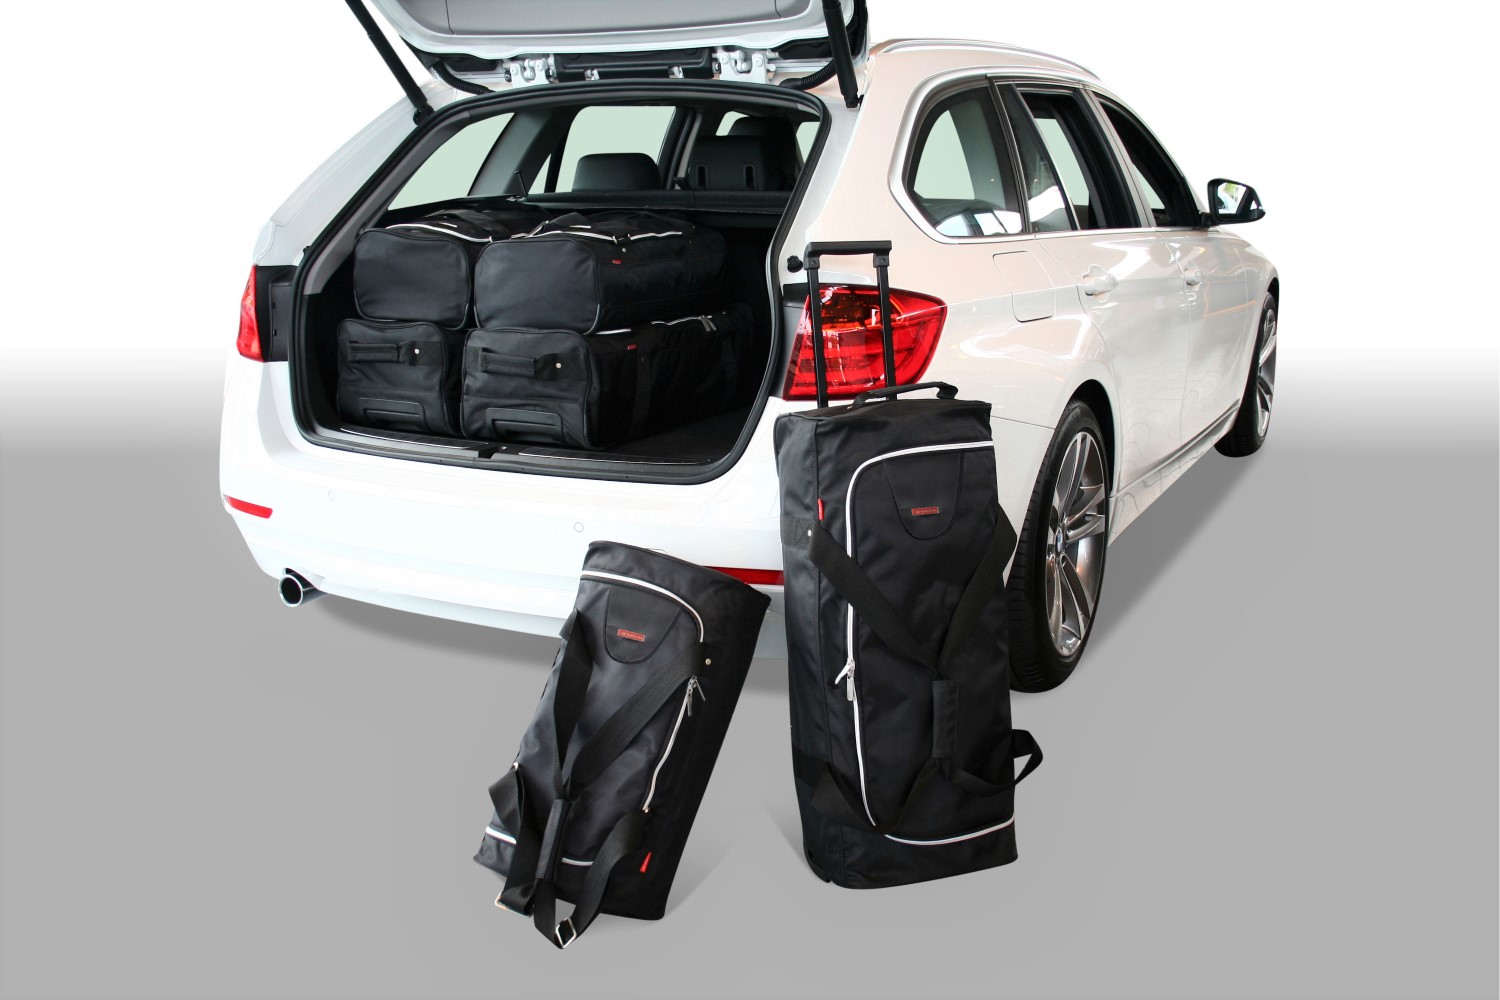 https://www.car-bags.com/images/stories/virtuemart/product/b11001s-bmw-3-serie-touring-f31-12-car-bags-1.jpg